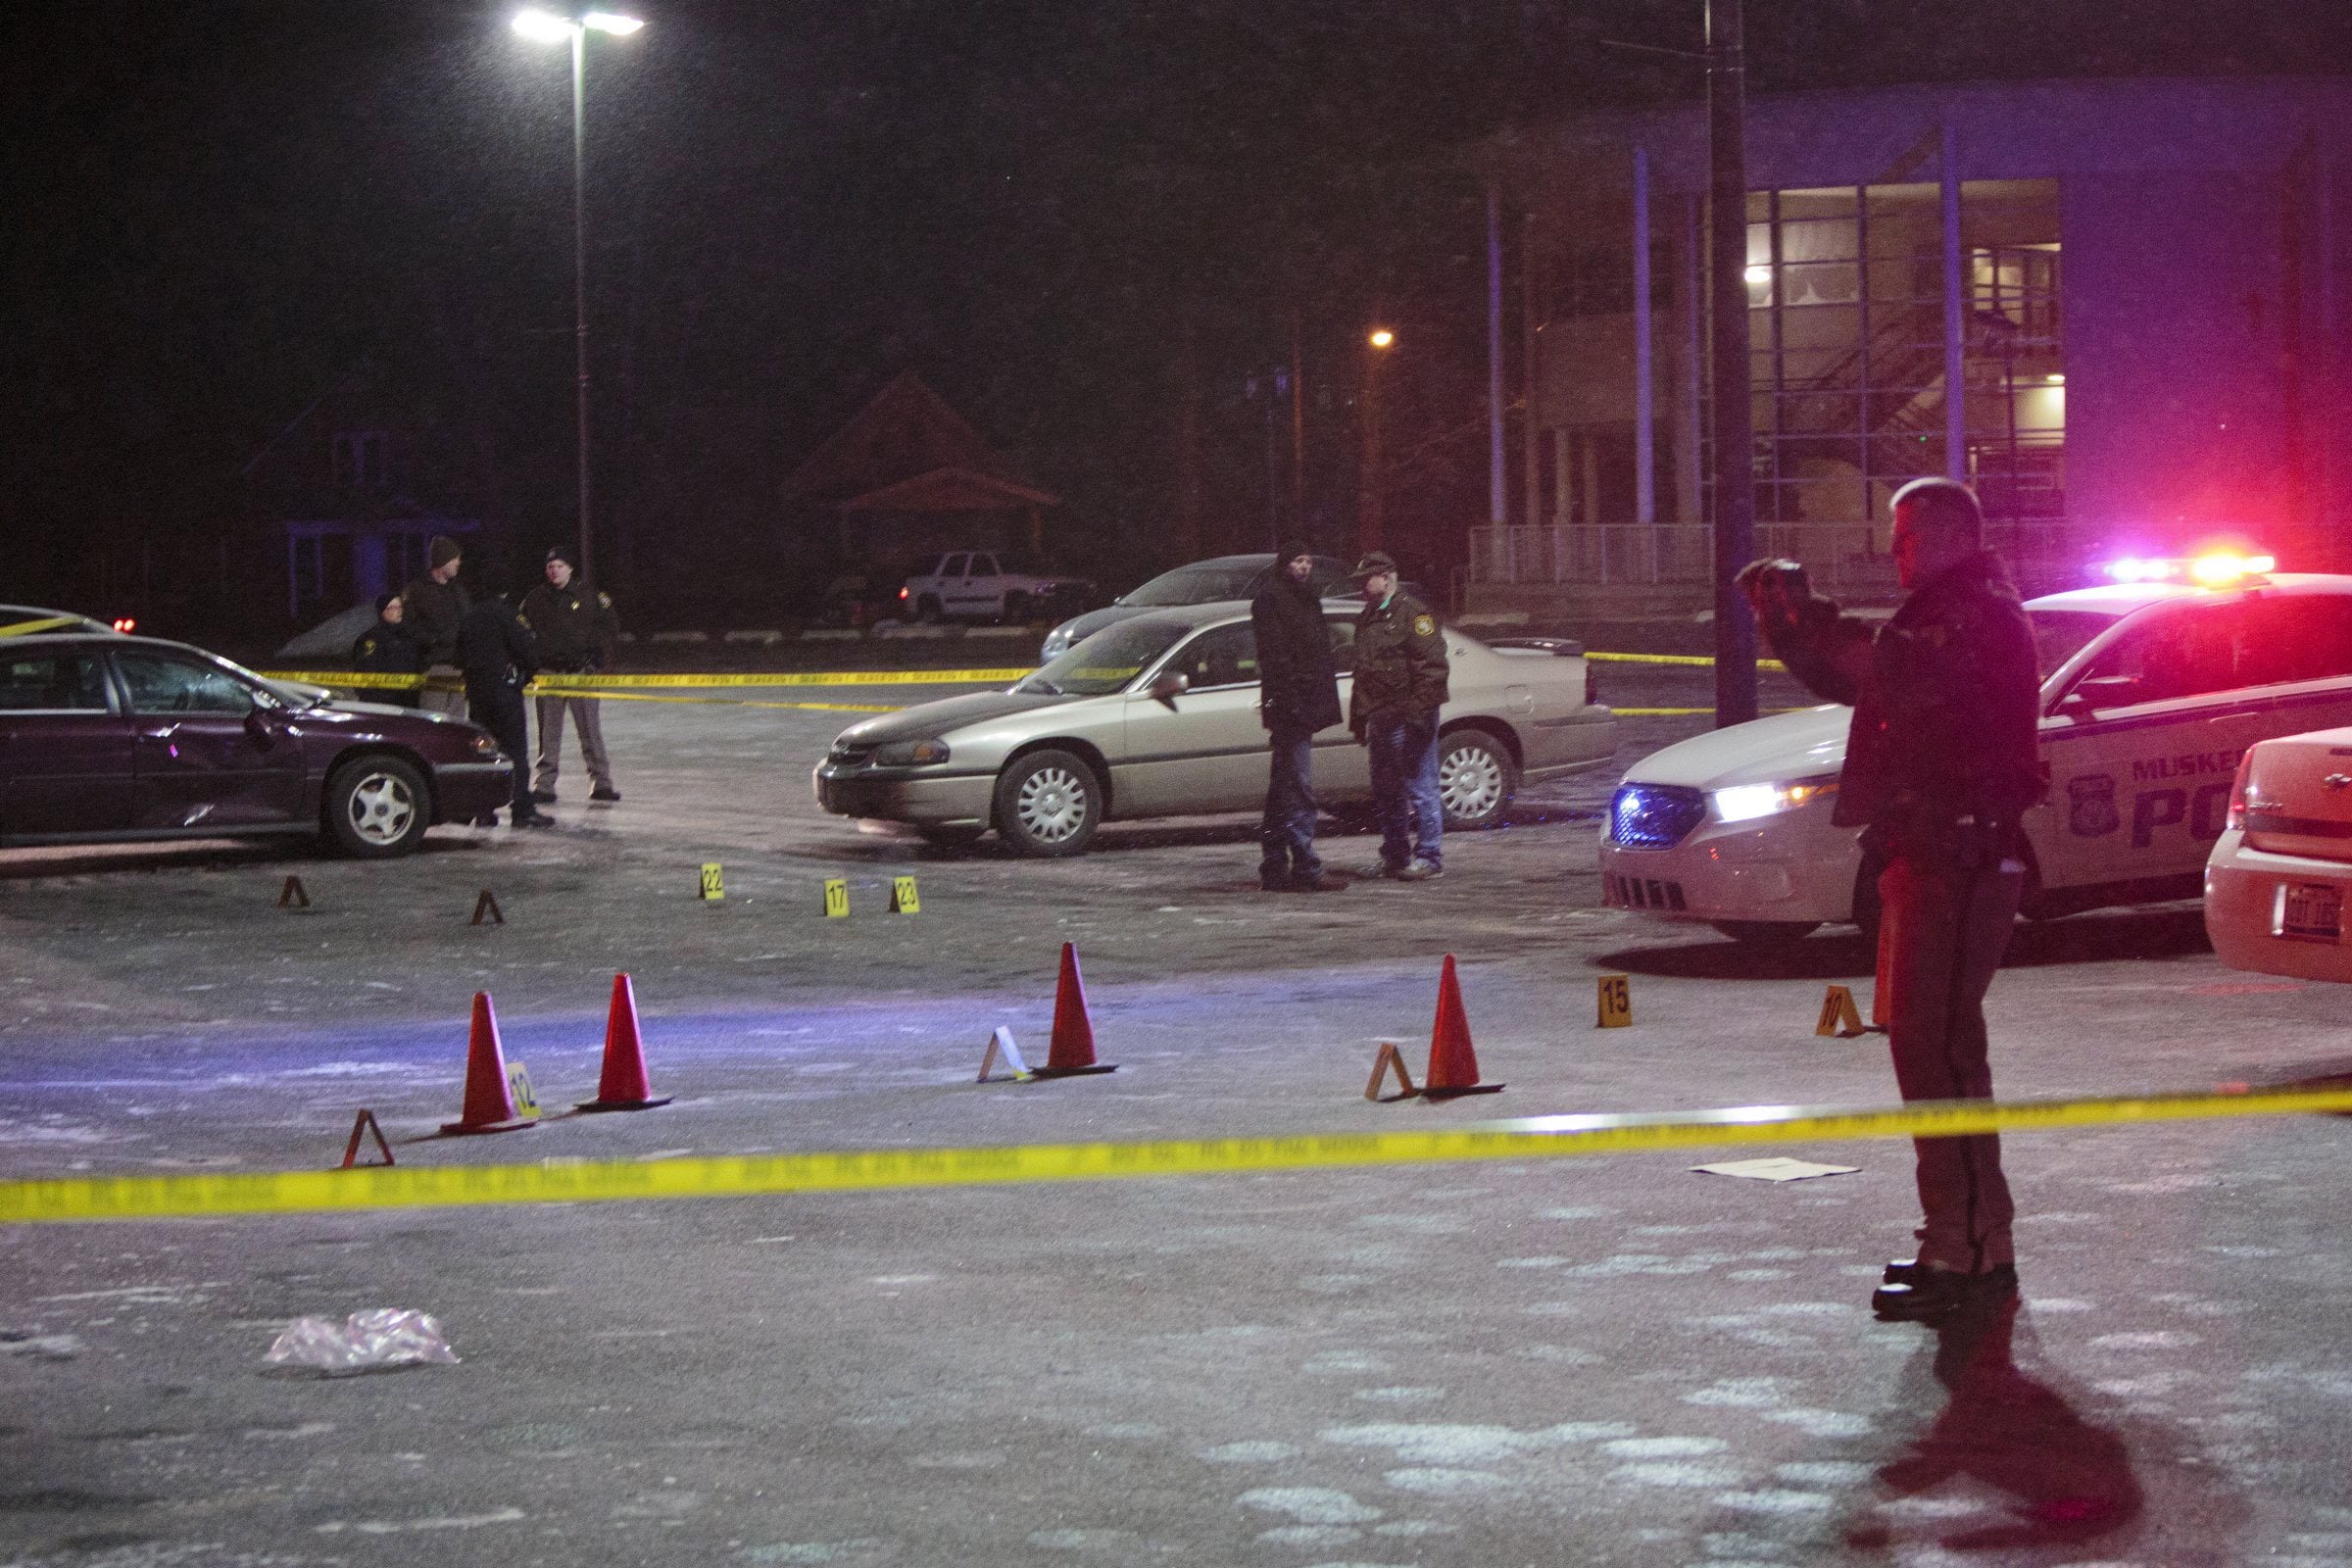 Officials investigate shooting scenes in the parking lot of Muskegon Heights High School in Muskegon Heights, Mich., Tuesday. The shootings happened around 9:30 p.m. after a basketball game at the high school.